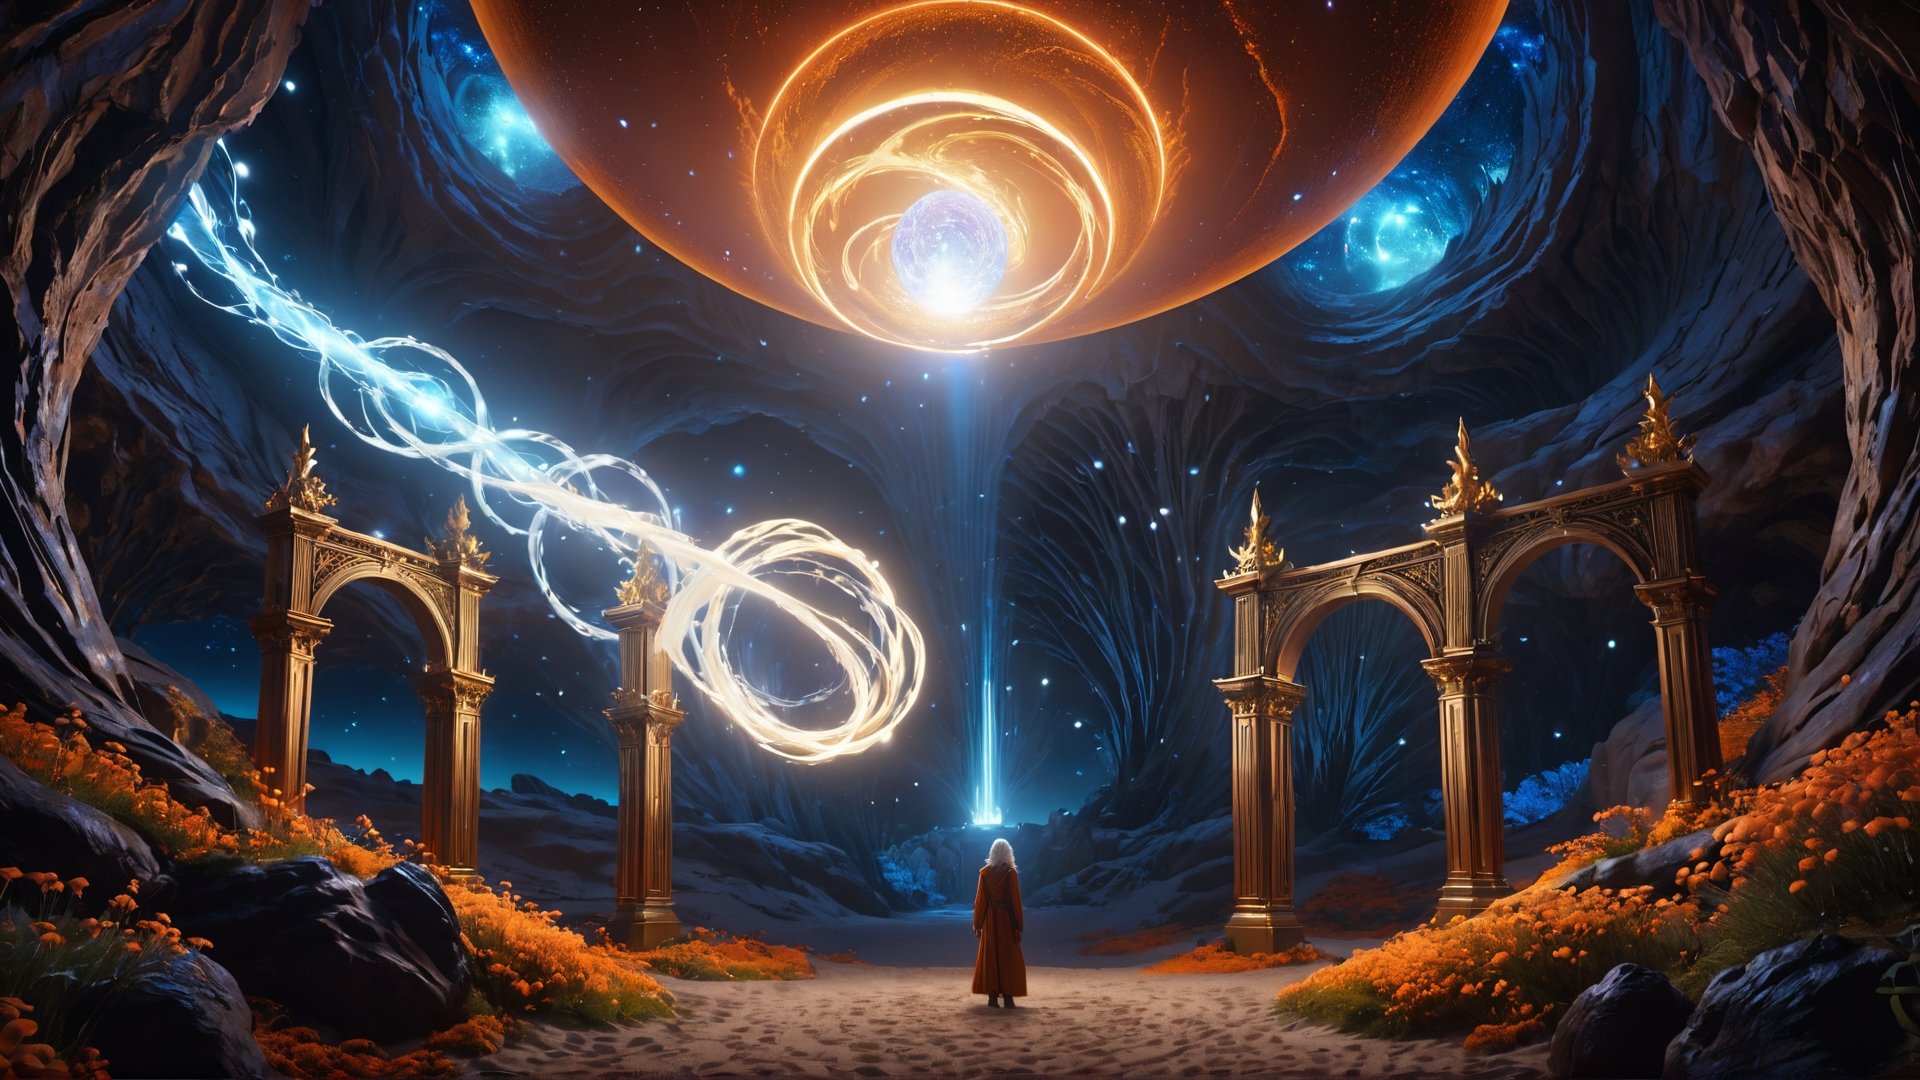 (Cinematic of a zen man Nordic kind, white long hair, he_levitating:2, he flying, calm. Wearing Blue Outfit Dune style, serene, center), inside a deep orange Cave, perfect knuckles, holding a hovering Cristal sharpen, cultivating immortals, magical, abstract, dark, (swirling_lights:1.7), bloom, floating objects, Accient Tree of Life, light on top heaven, ((Epic scene, gate energy)), refers to a place of wild uproar or chaos, polarization, Glowing, aura, energy, floating debris. Modern art style, promptshare.art, horrible scene, Film Still, realistic, Frequency vibration, hyper details, Renaissance Sci-Fi Fantasy, ((((Close-up shot:2)))